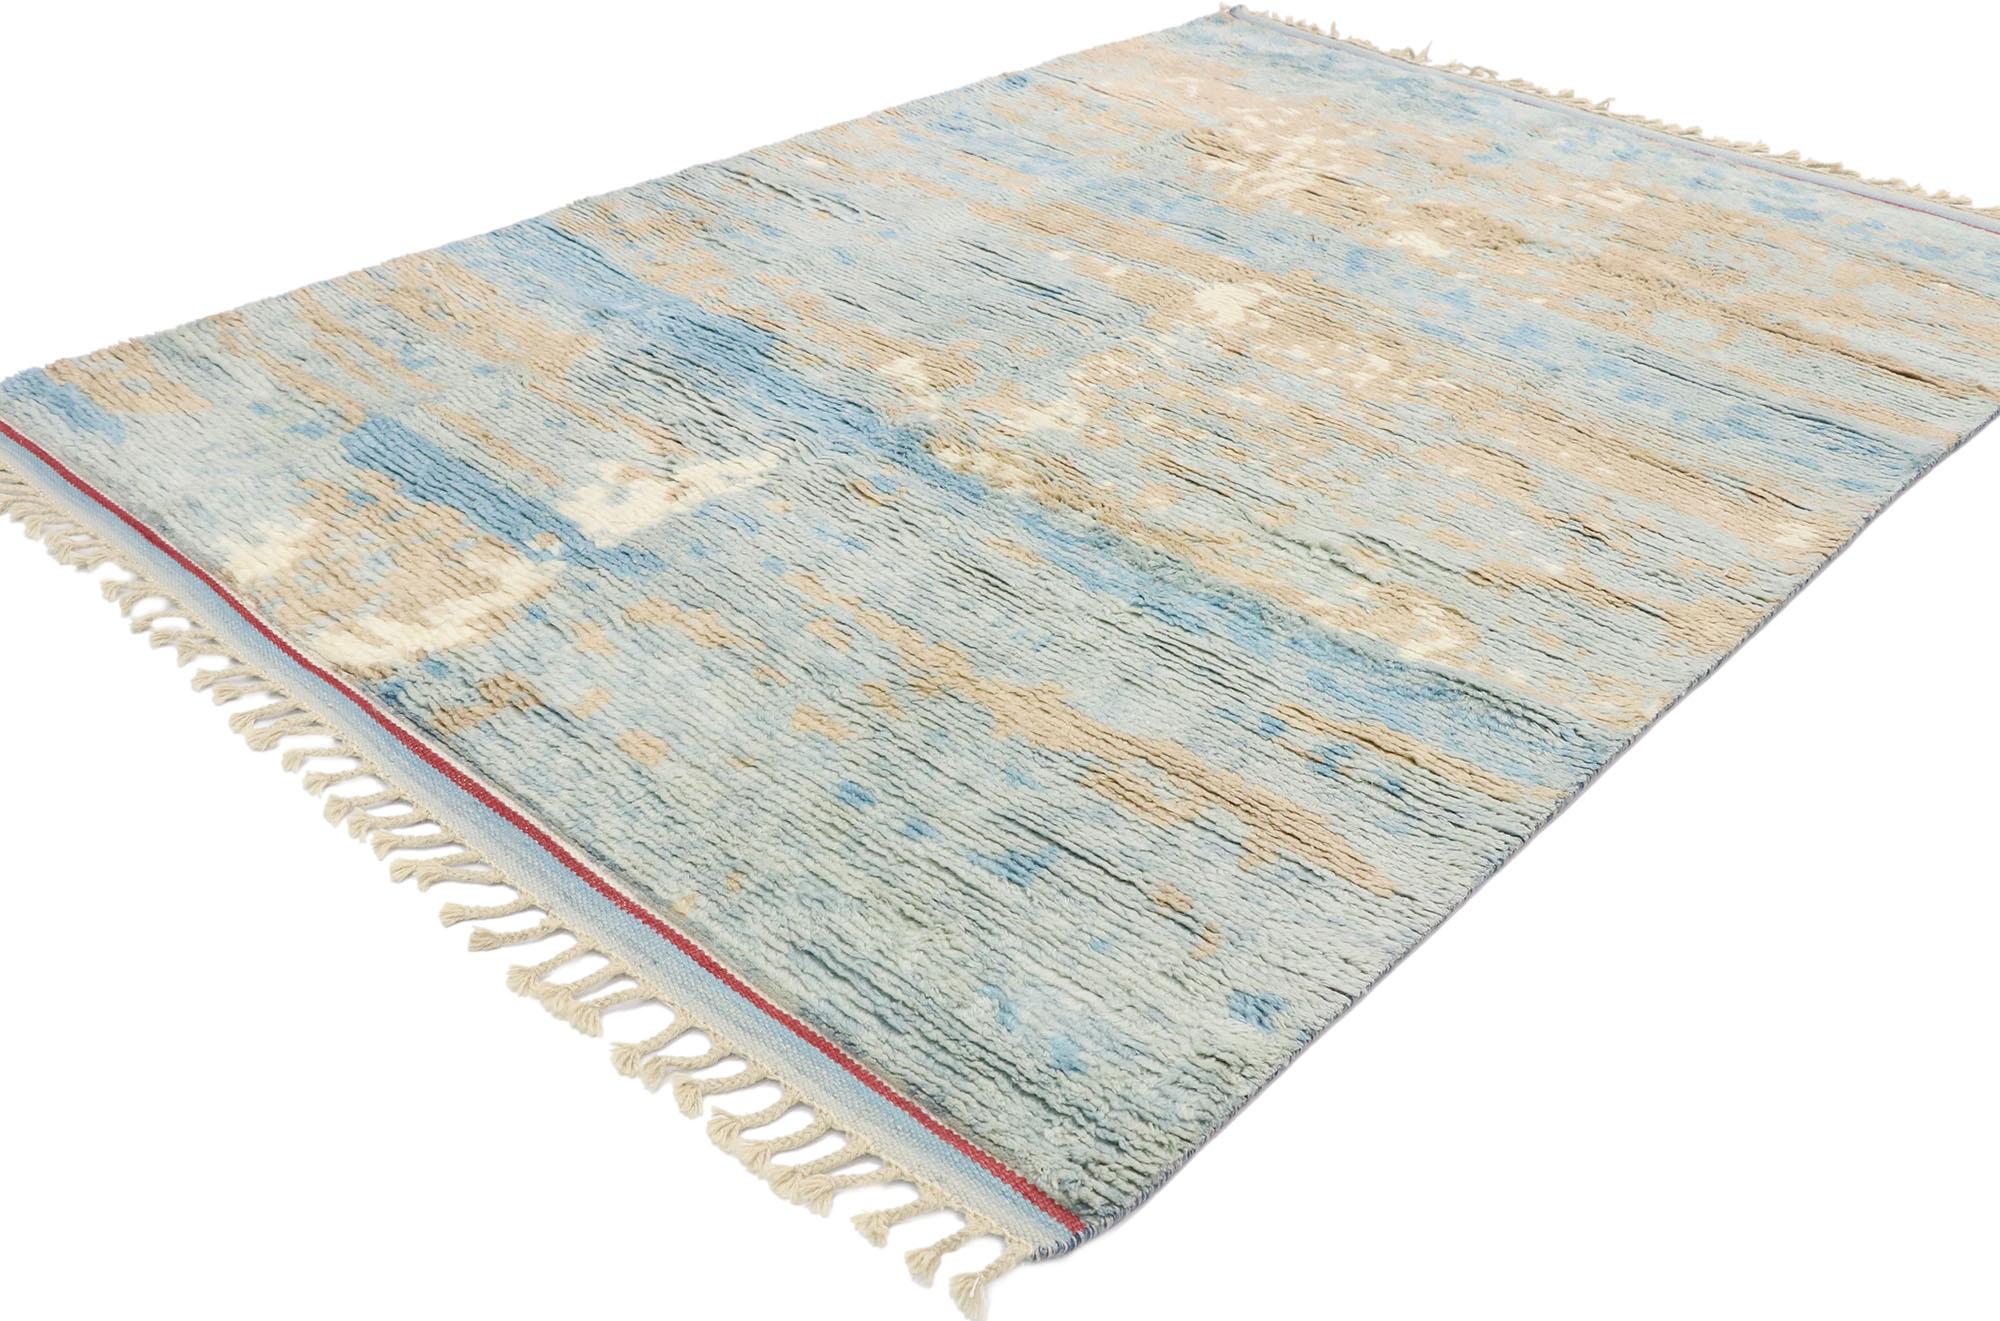 30573, New Contemporary Moroccan Area Rug 05'08 x 08'00. Coast into contemporary beach style and cozy contentment with this hand knotted wool contemporary Moroccan area rug. Showcasing an expressive yet subtle design, incredible detail and texture,